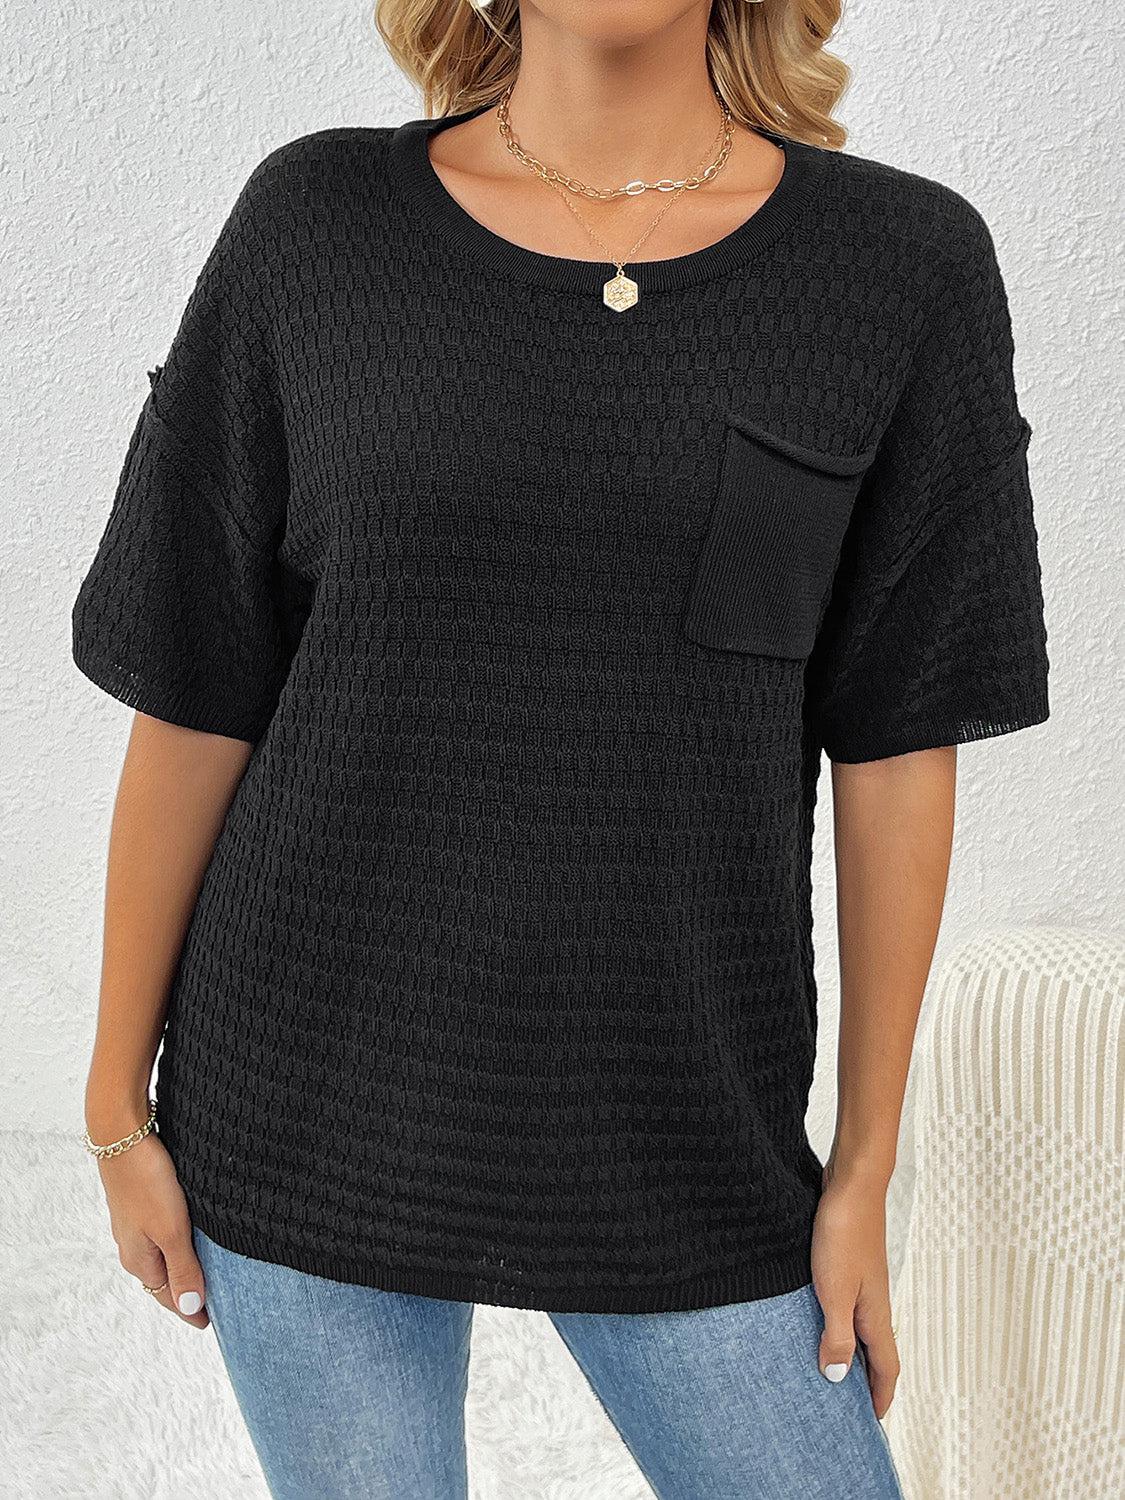 a woman wearing a black top with a pocket